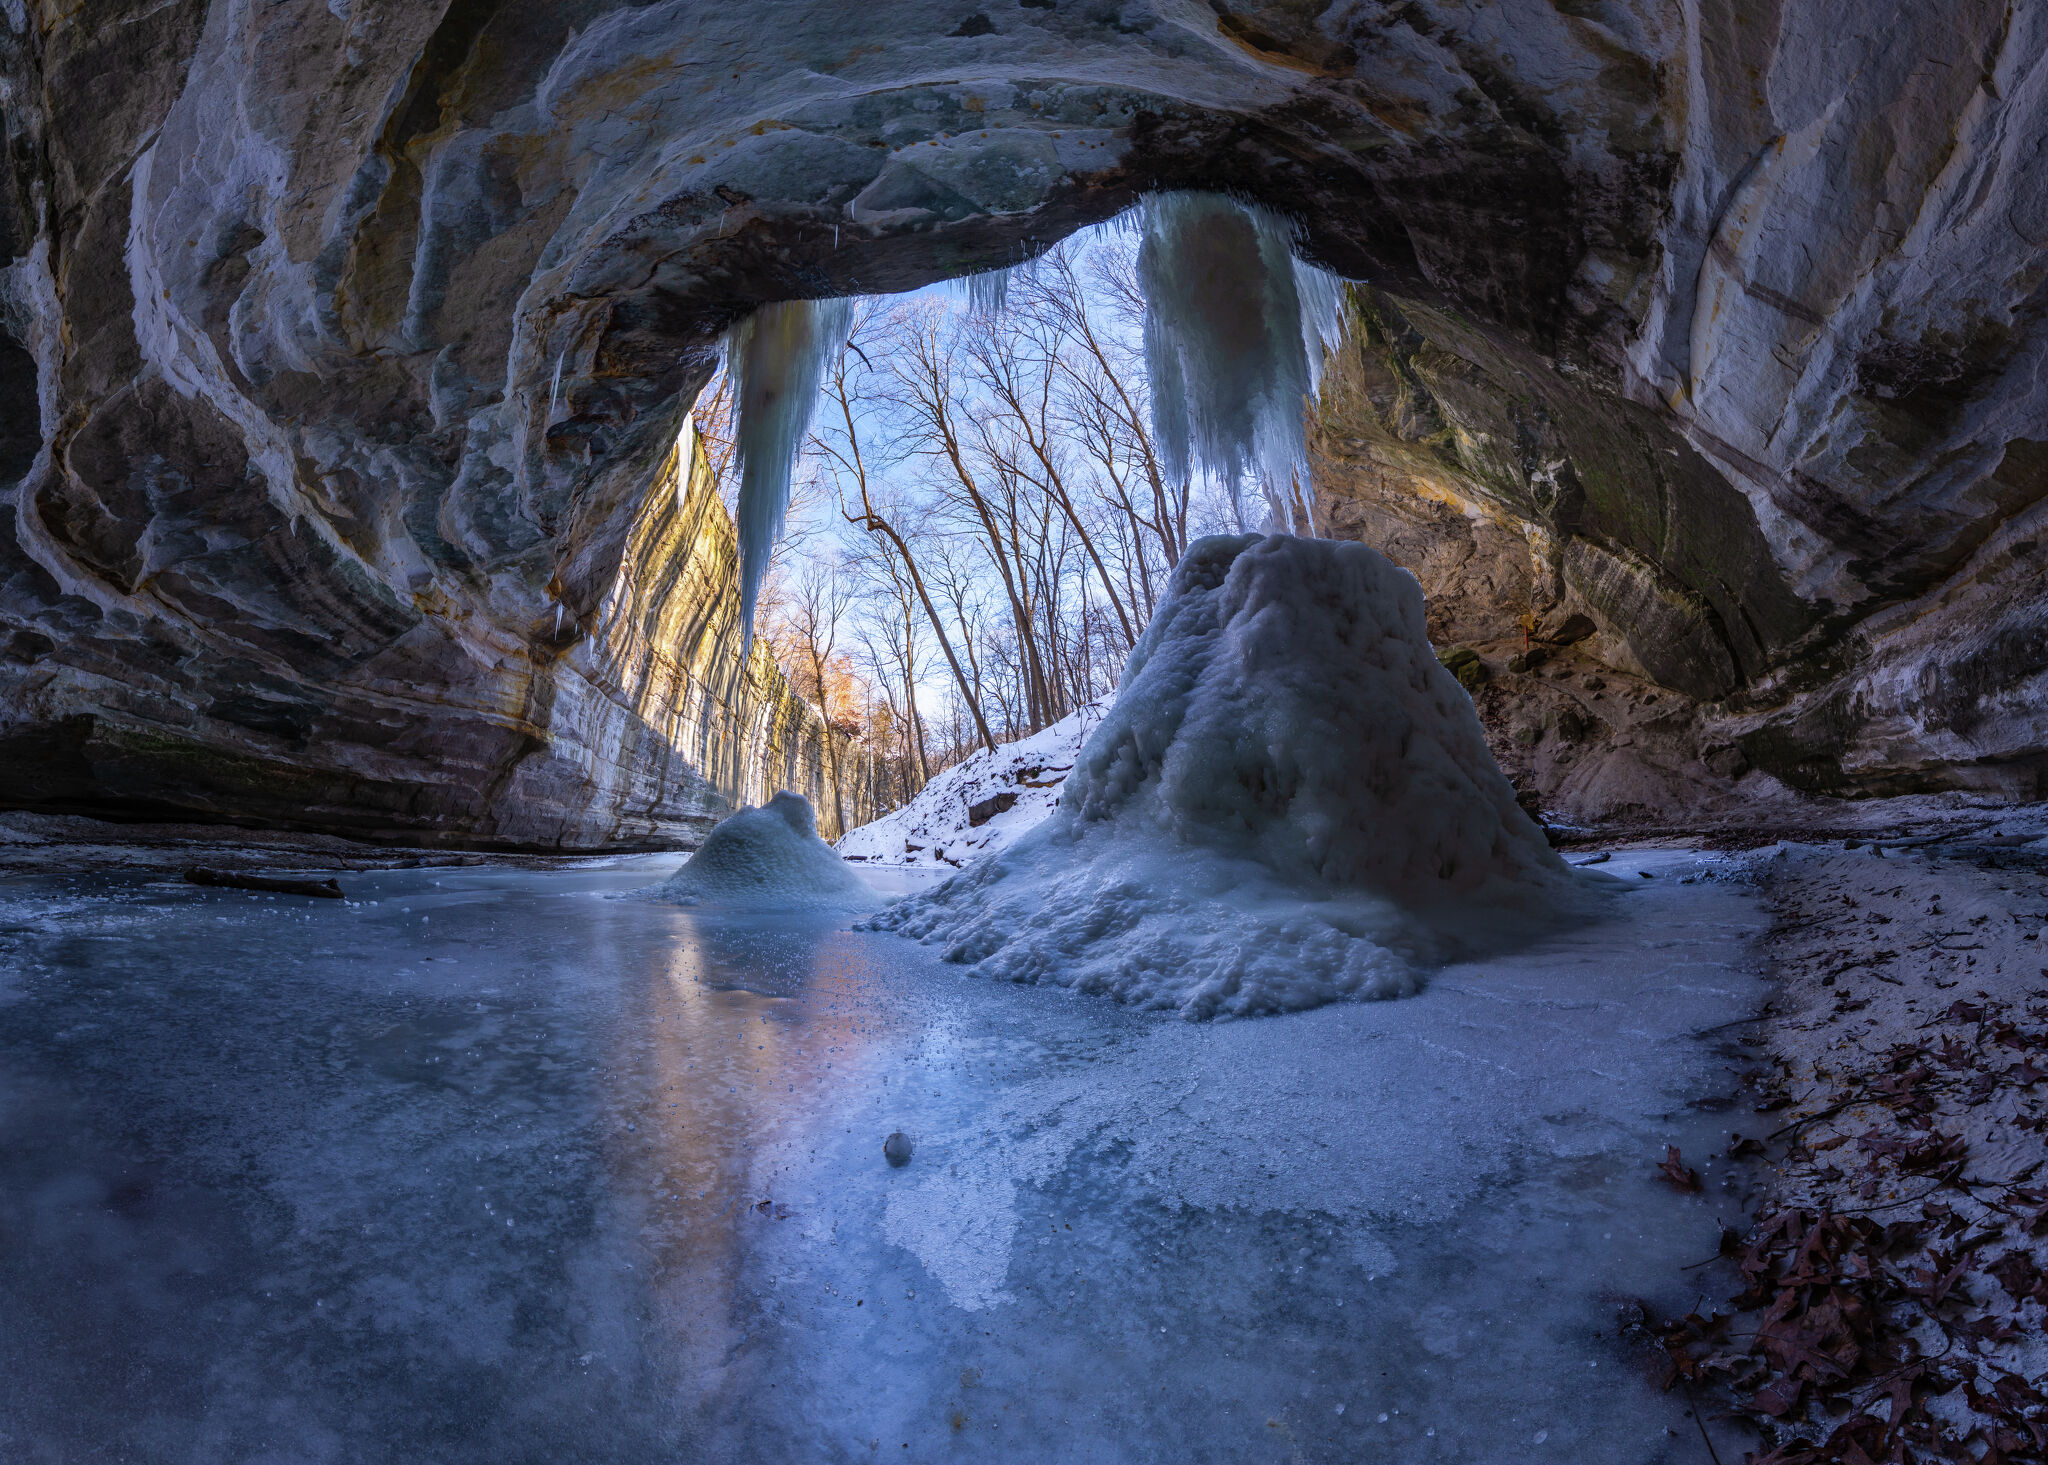 5 picturesque Illinois state parks and locations to visit this winter